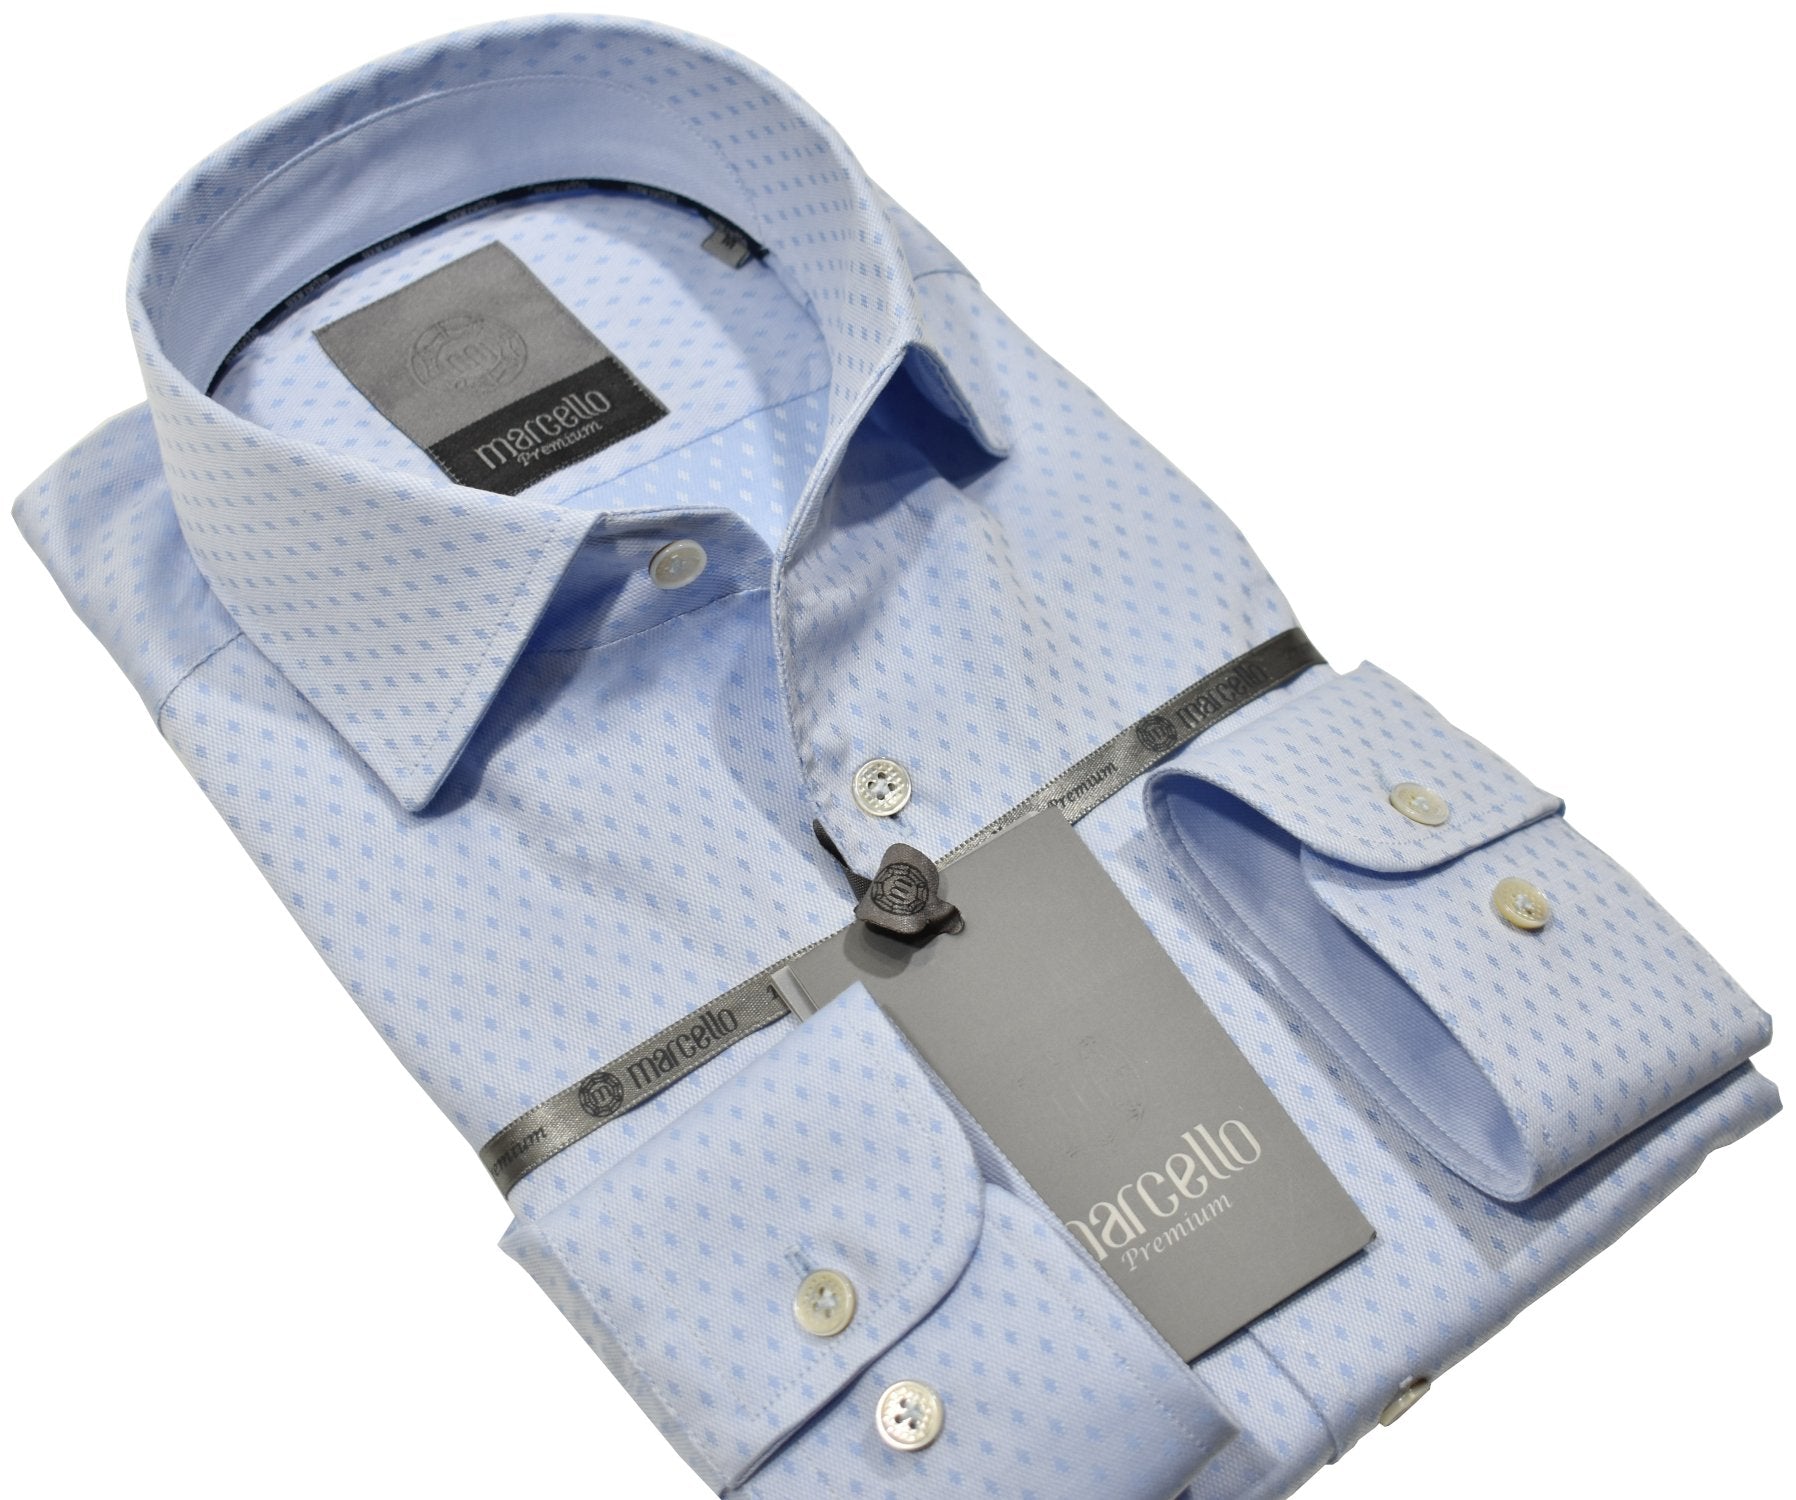 Elevate your wardrobe with the Marcello Premium Shadow Diamond Tag shirt. Crafted from extra fine fabrics sourced from fine Italian mills, our Marcello Premium program offers 100's 2 ply shirts in rich classic patterns. With the Marcello exclusive one piece roll collar, you'll feel confident and stylish in any setting.